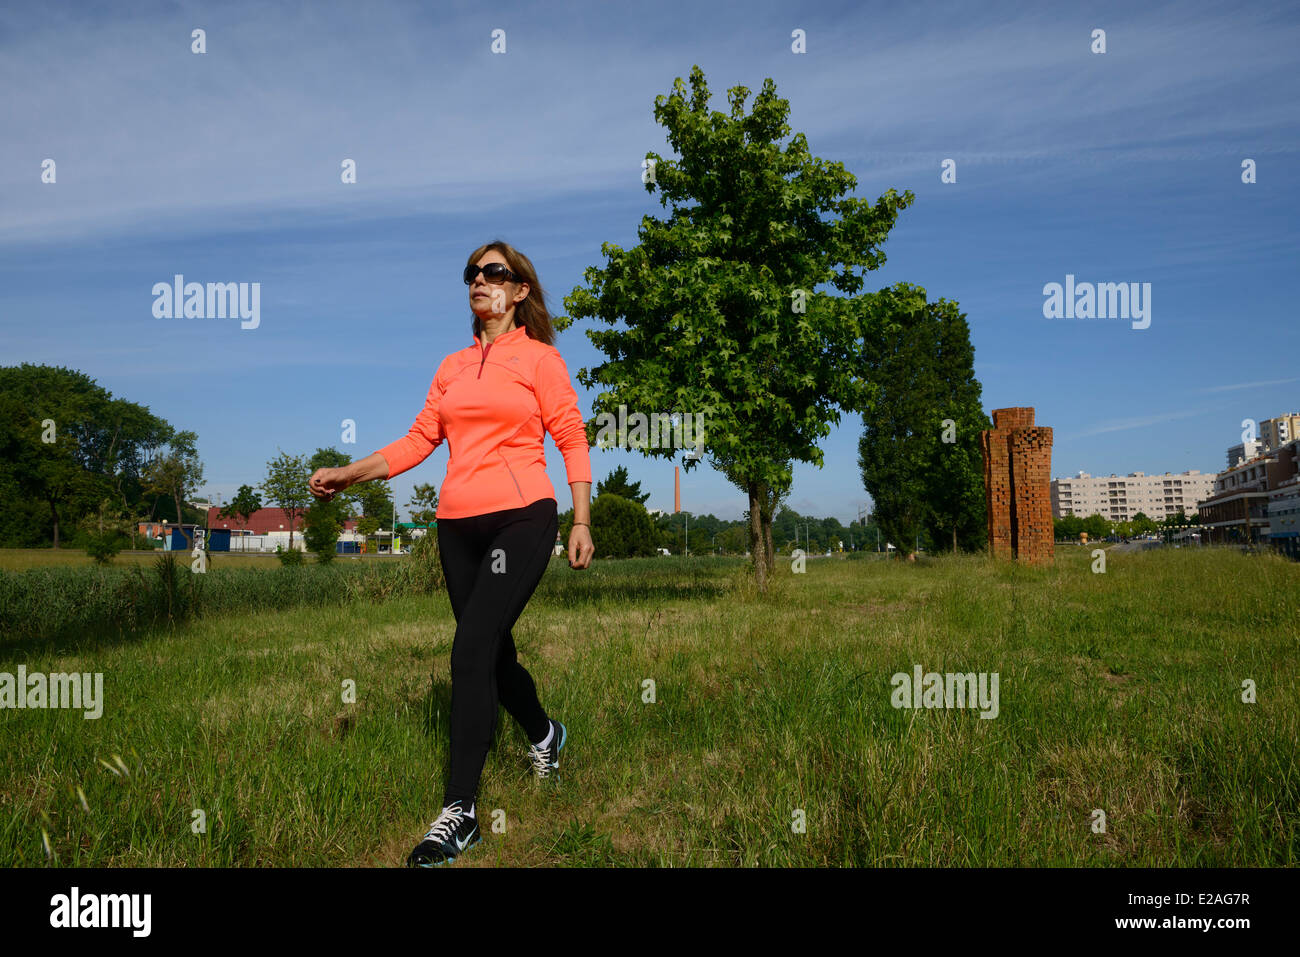 Woman power walking in a park Stock Photo